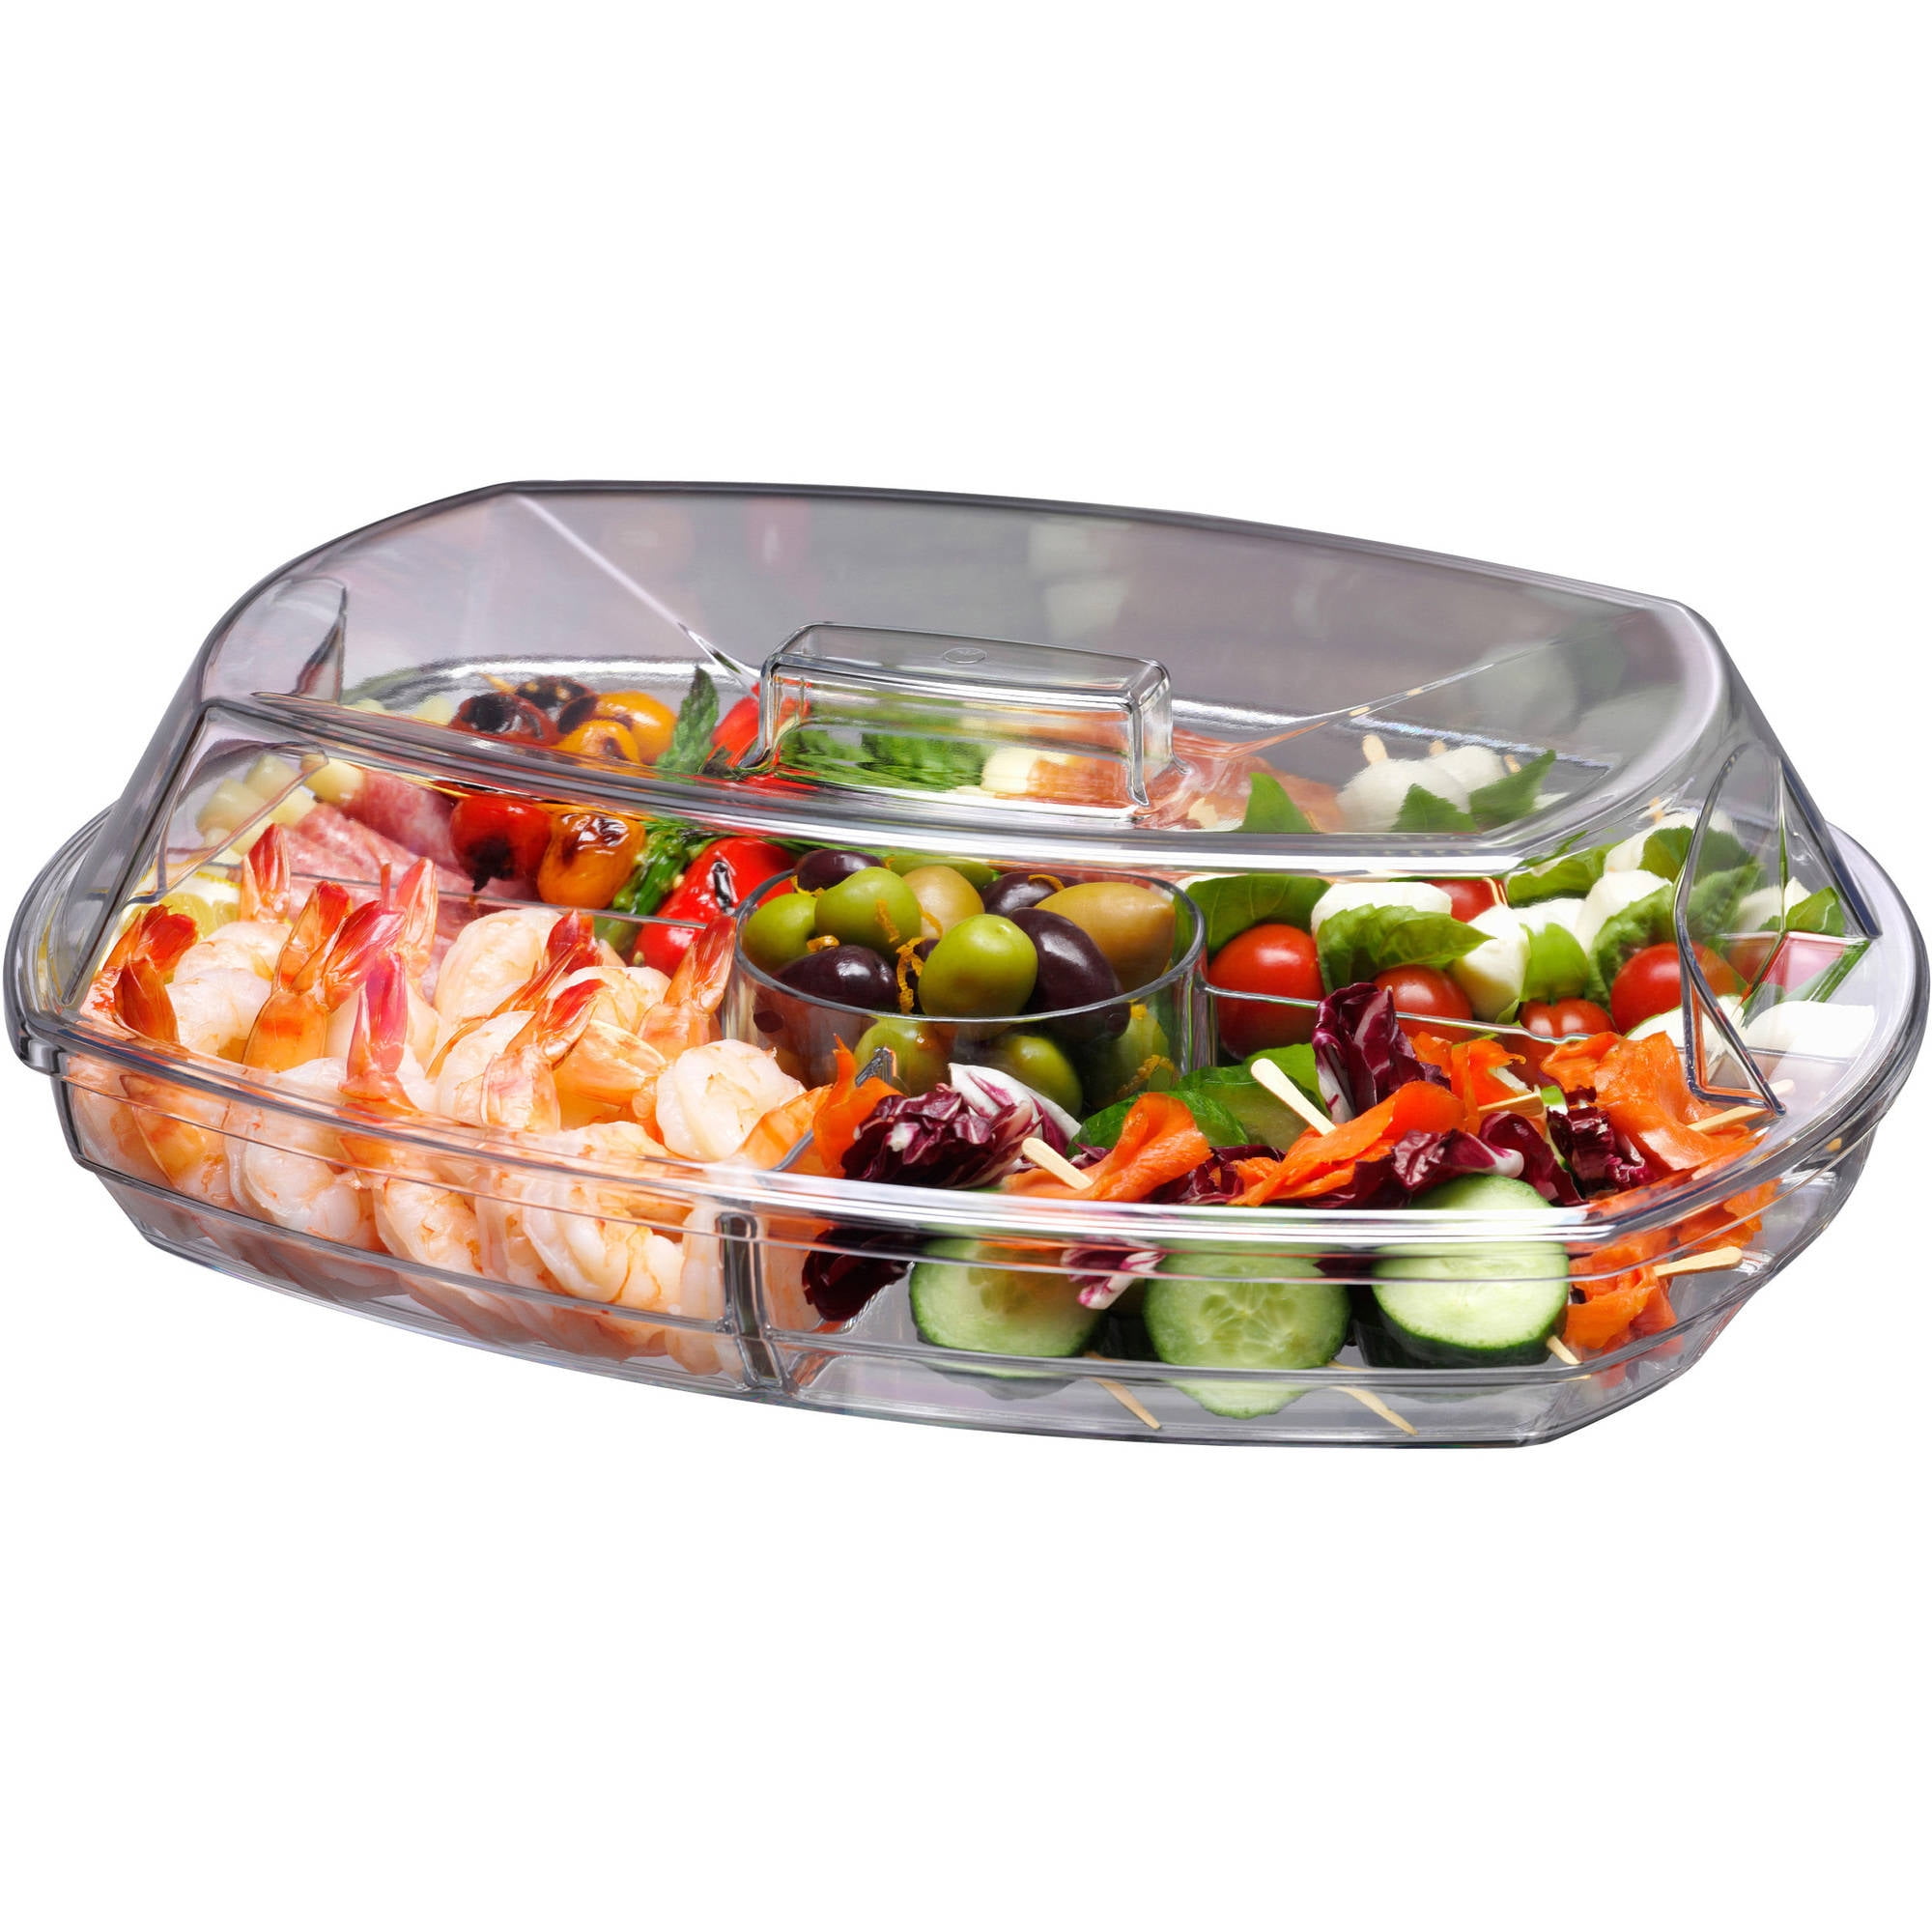 Prodyne Iced up Salad to Go Carry and Serve Bowl for sale online